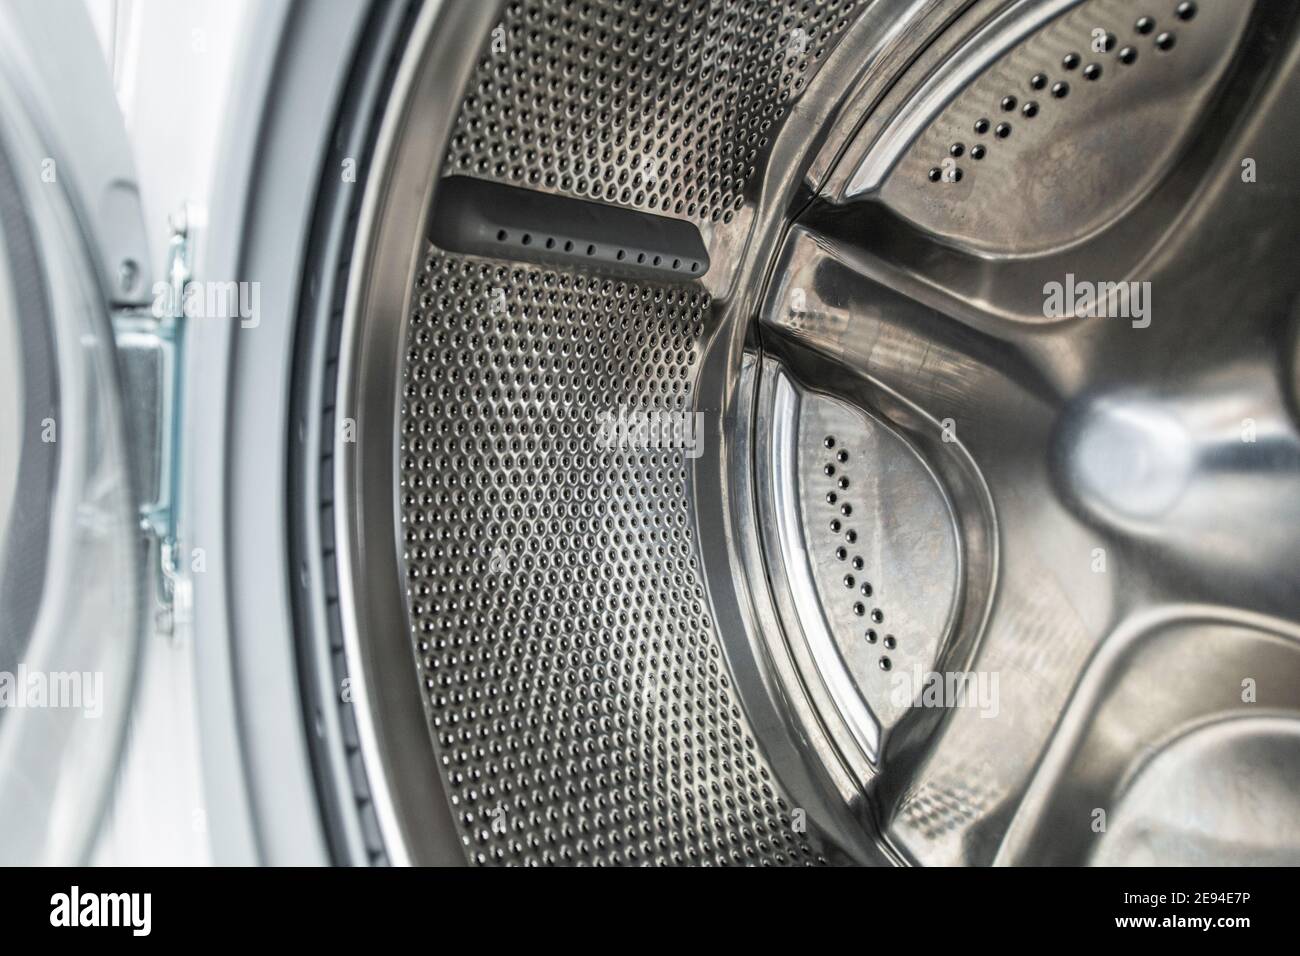 Clean Stainless Steel Laundry Machine Drum Close Up. Washing Technologies and Equipment Maintenance. Stock Photo